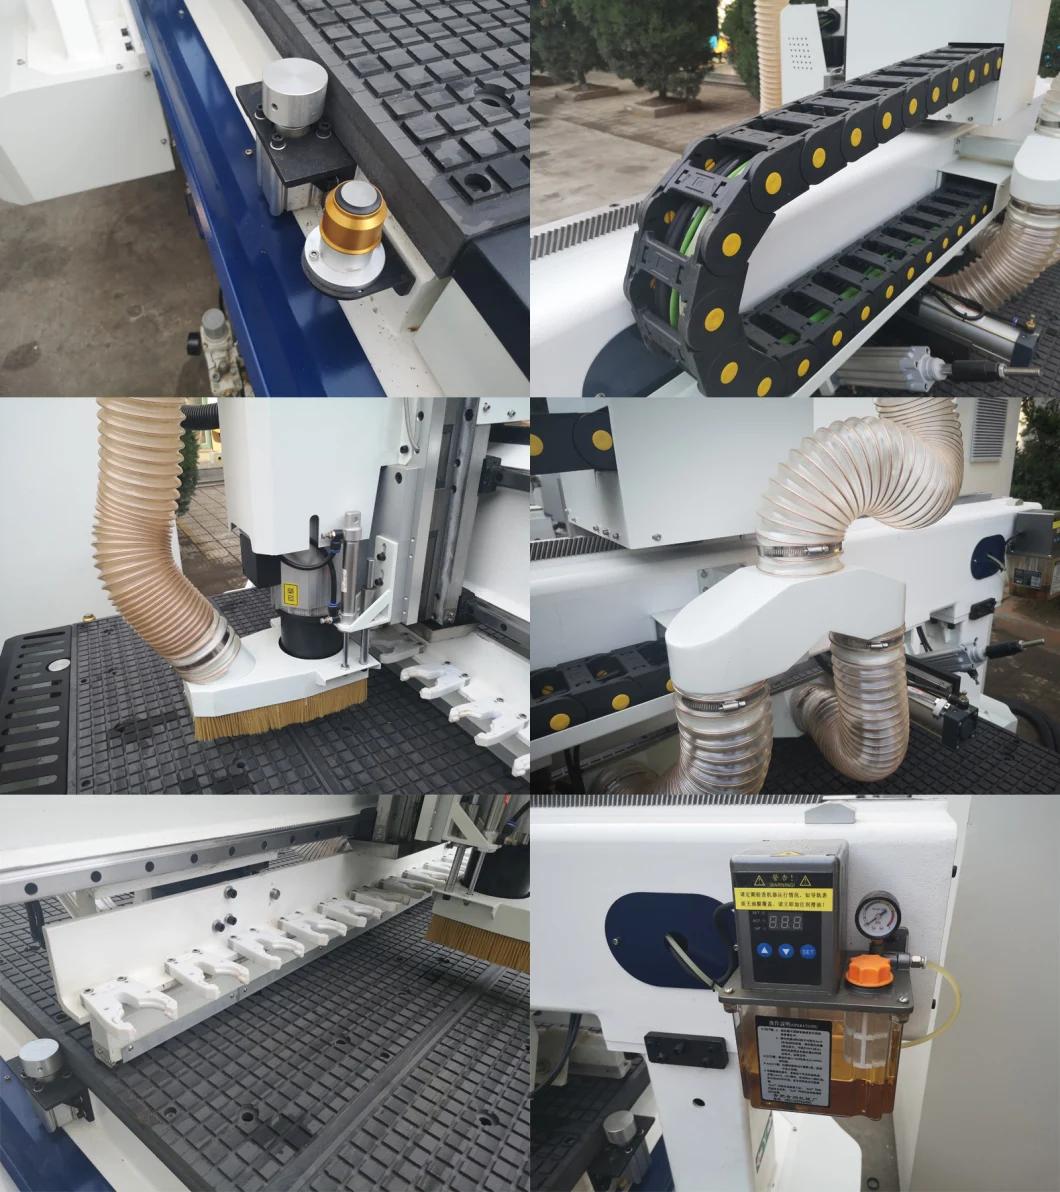 Mars S100-D CNC Router Machine with Auto Tool Change and Double Working Tables